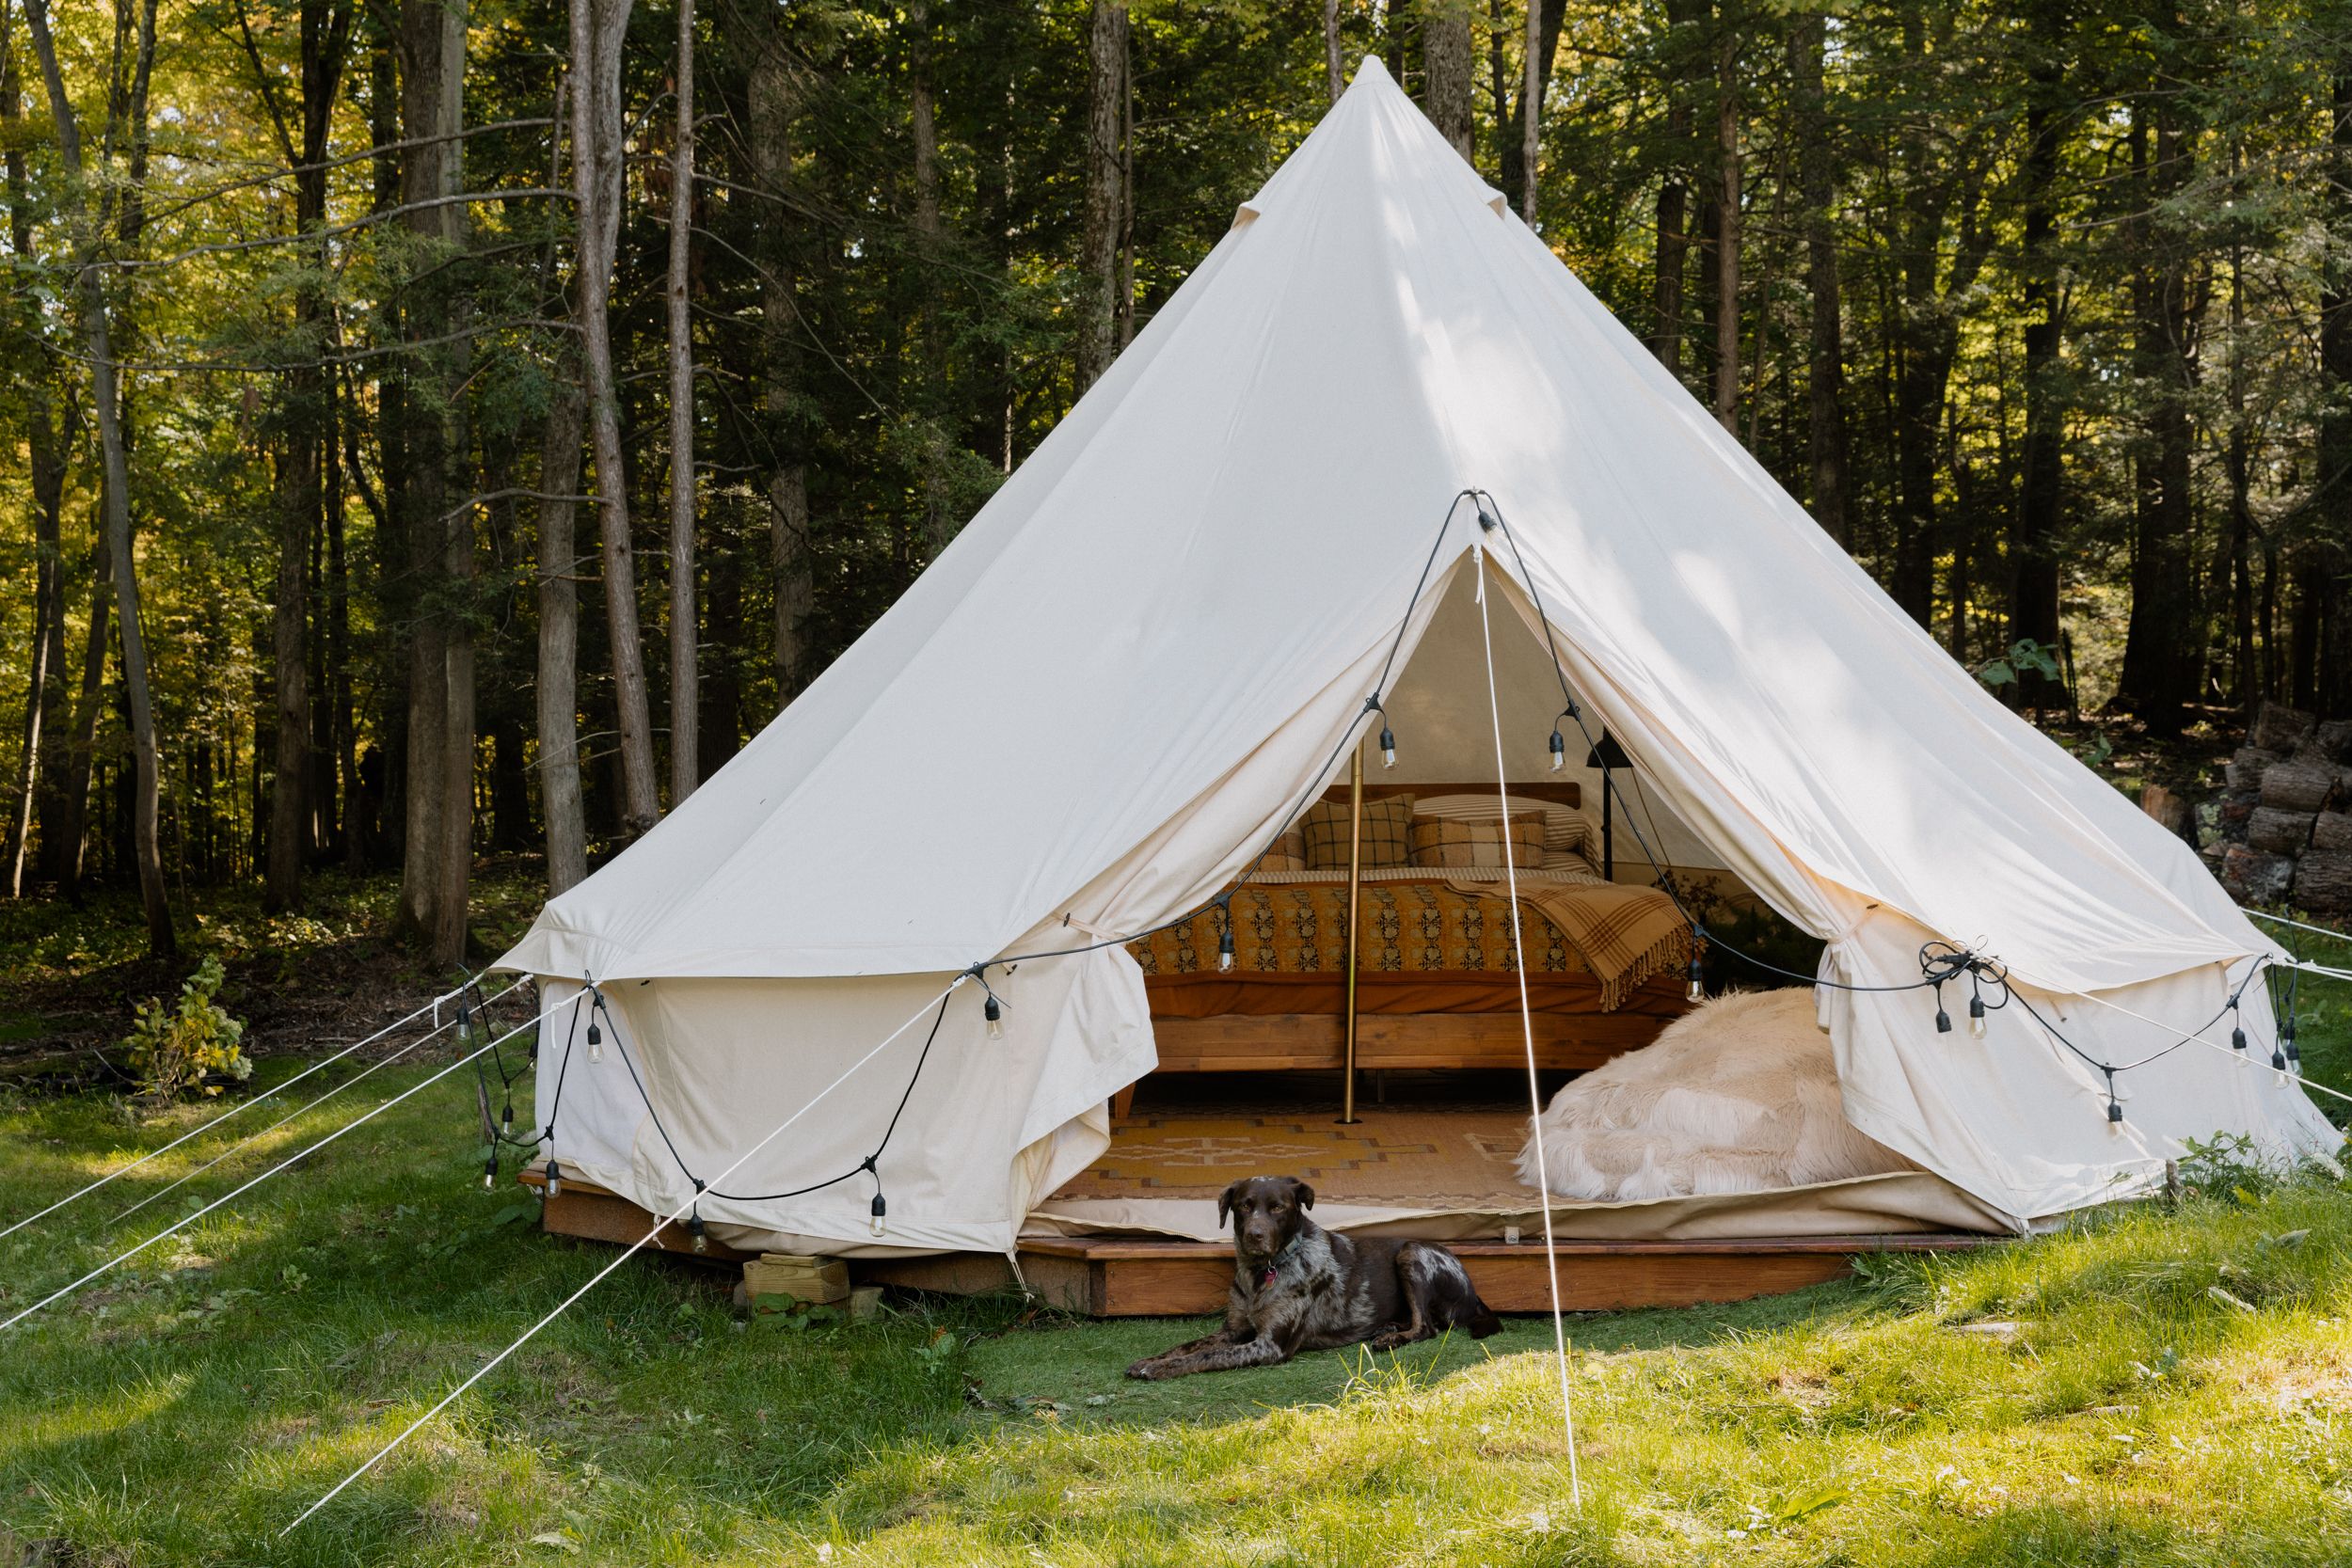 I Lived Like I Was 'Camping' in My Apartment to Save $5,000 in a Year